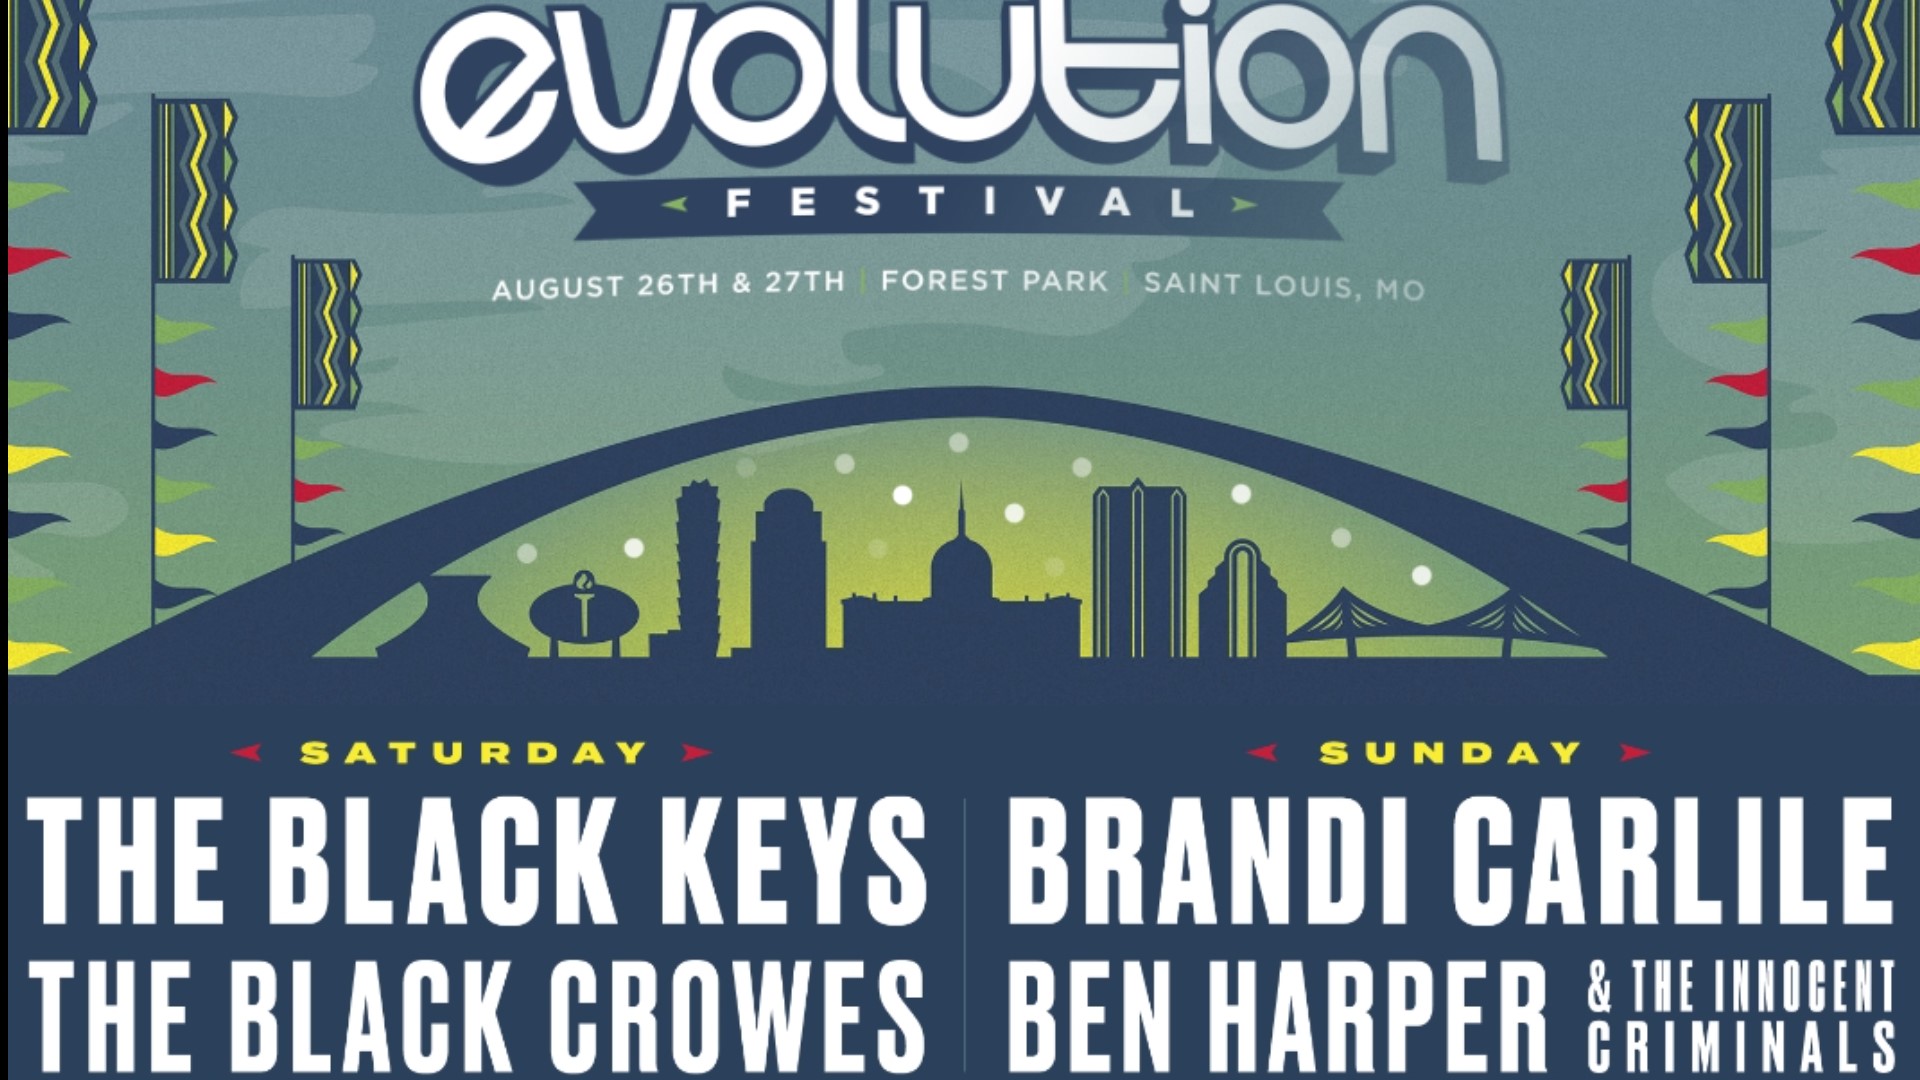 Evolution Festival kicks off in Forest Park this August